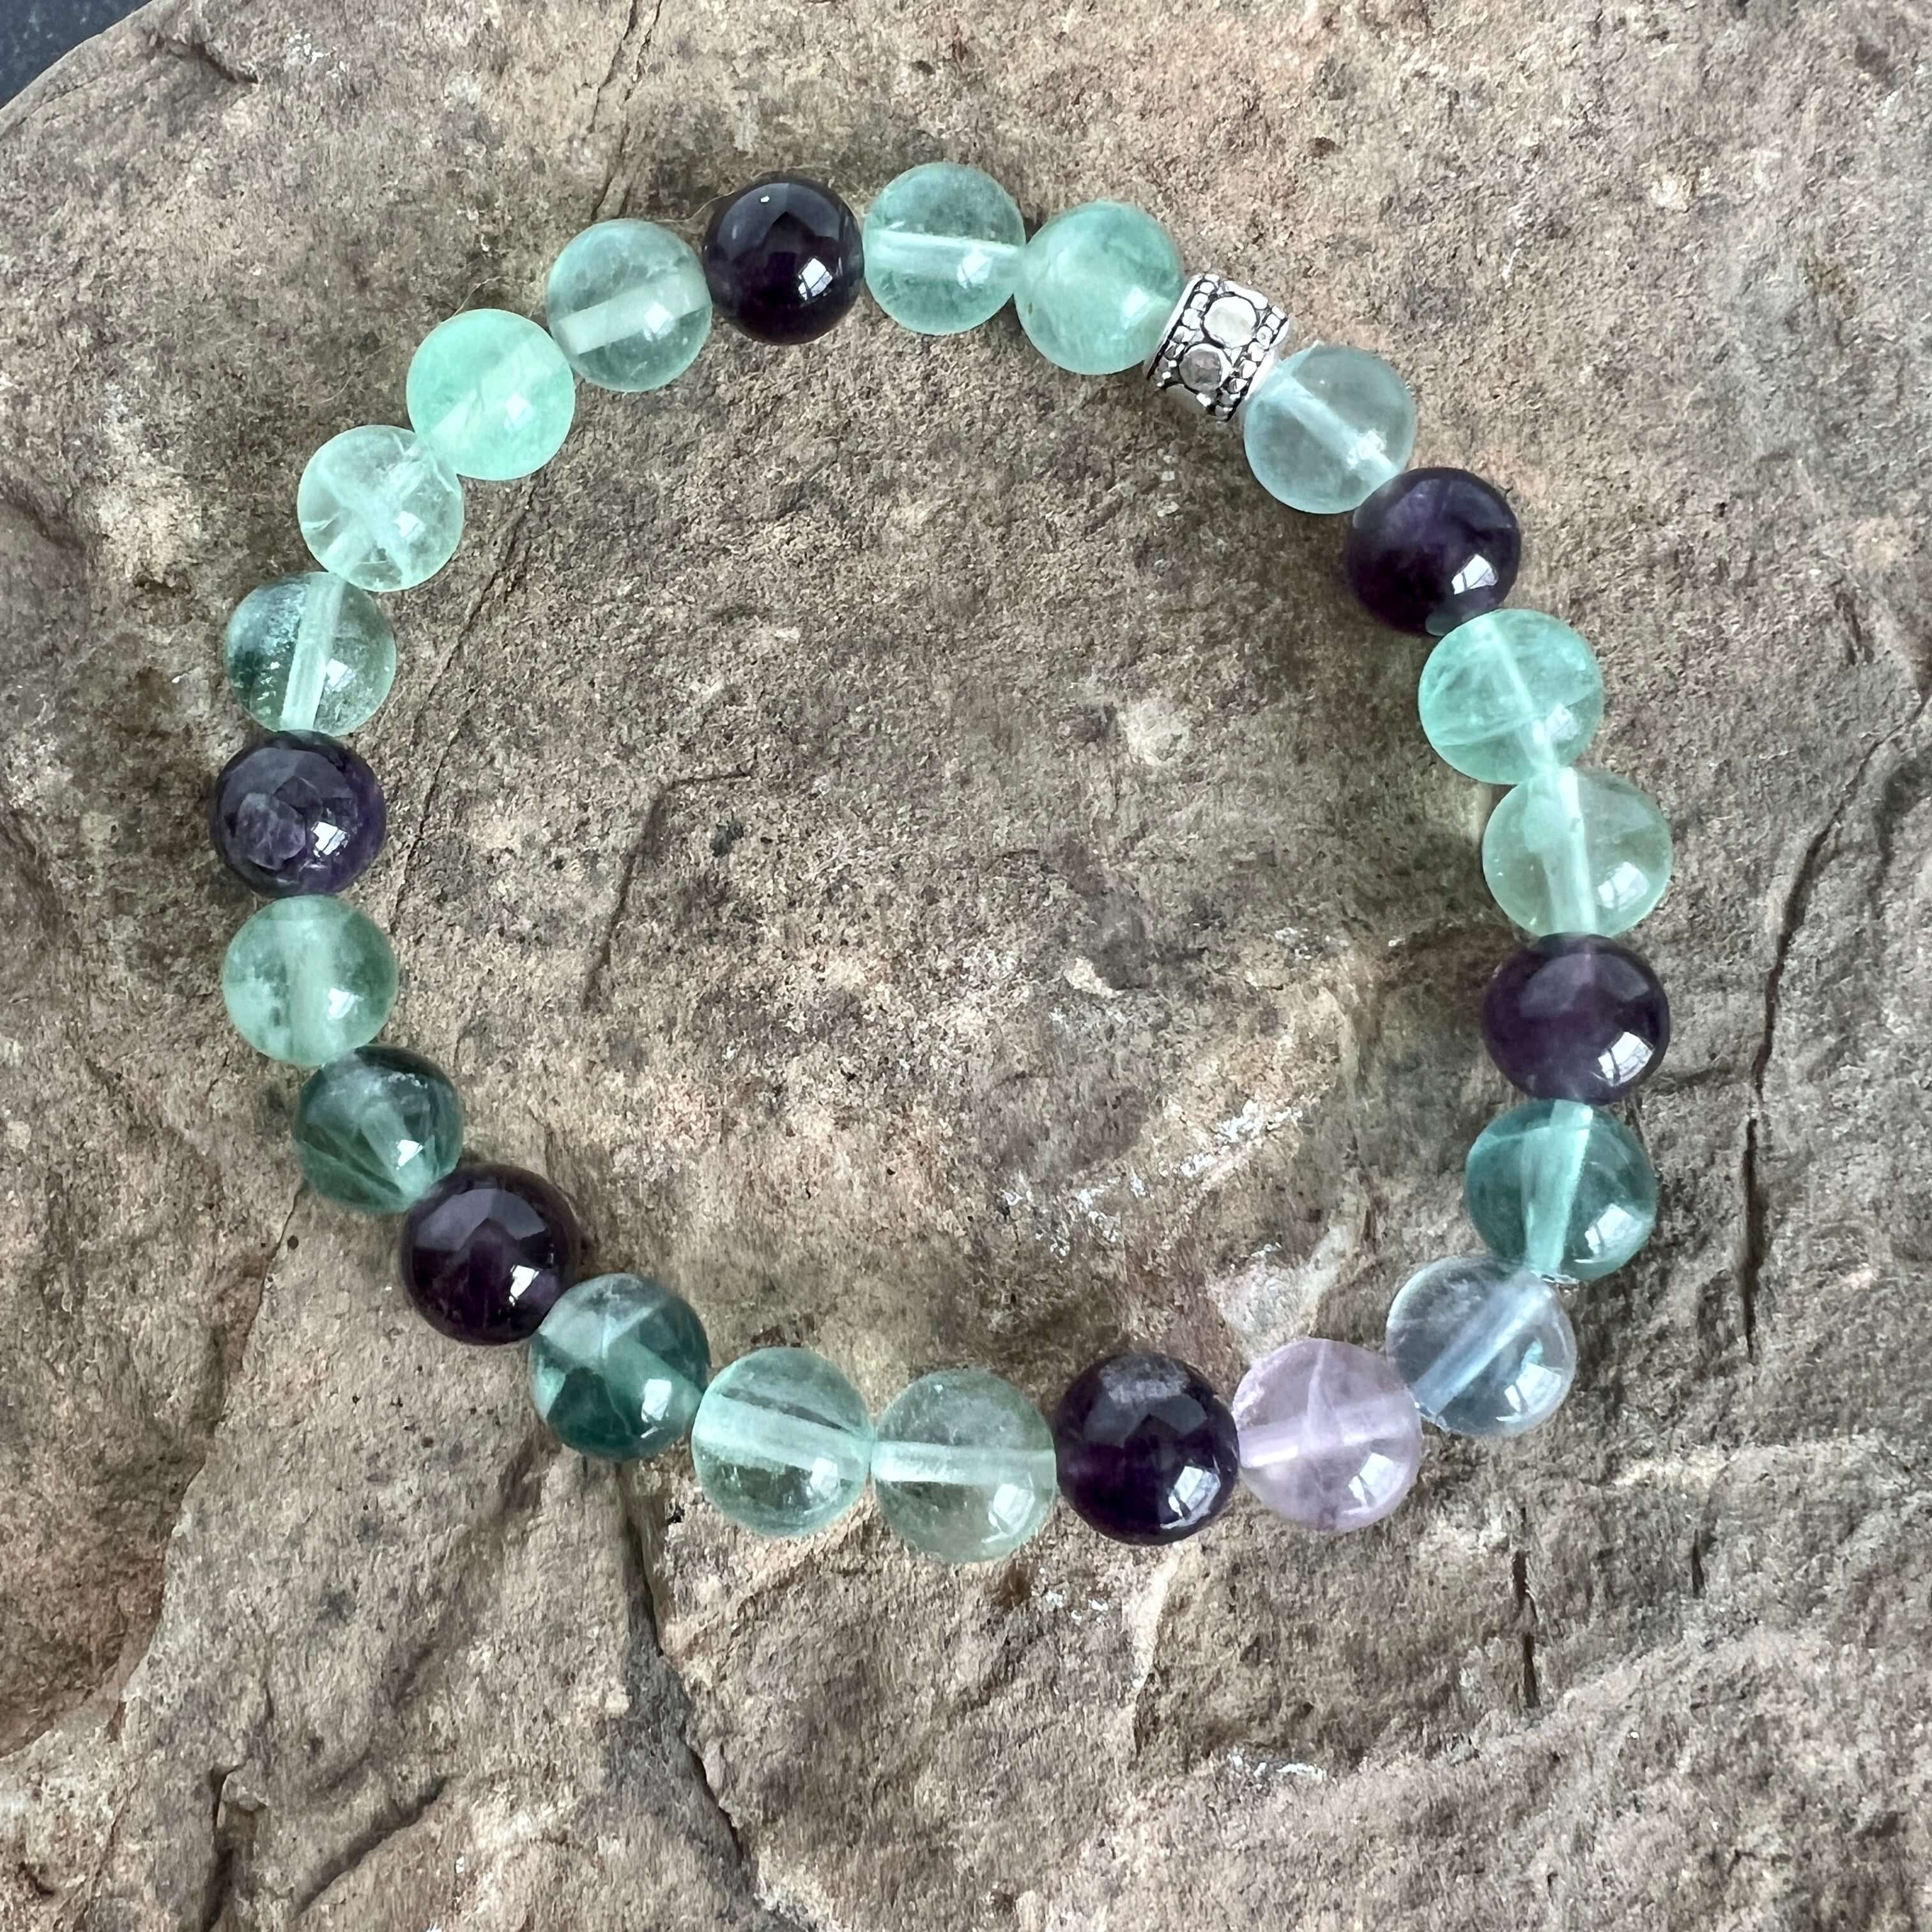 Fluorite and Amethyst Bead Bracelet This bracelet is made with high-quality Fluorite and Amethyst stones which bring stability, protection and awareness to the wearer. Zodiac Sign: Capricorn. Chakra: Heart. Handmade with authentic crystals and gemstones i